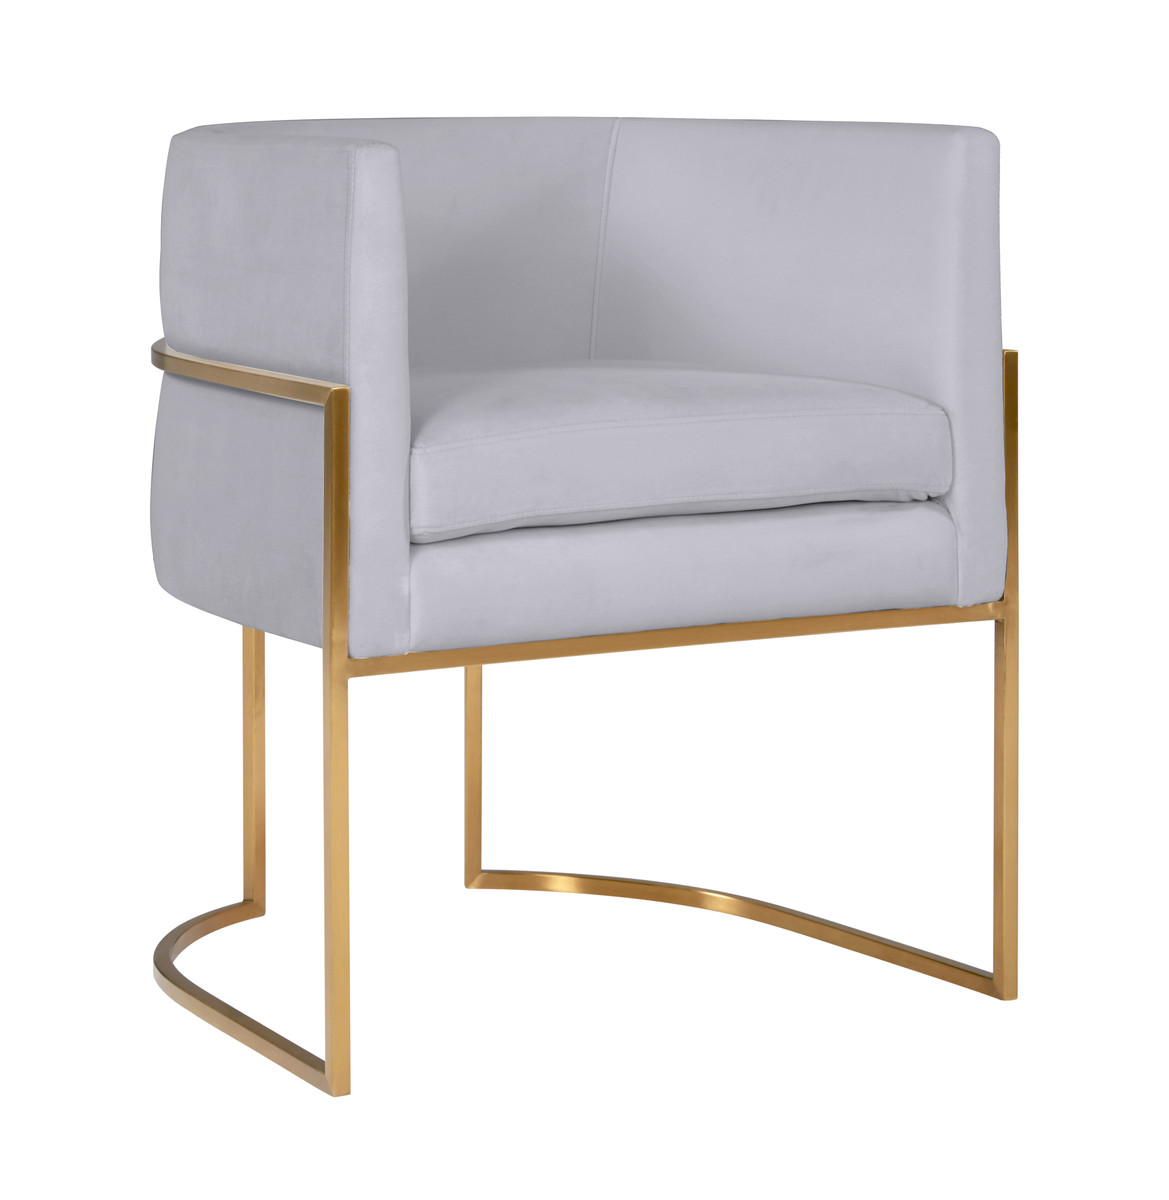 TOV-D6301 Giselle Grey Velvet Dining Chair with Gold Leg - 28 x 24.4 x 23.2 in -  Tov Furniture